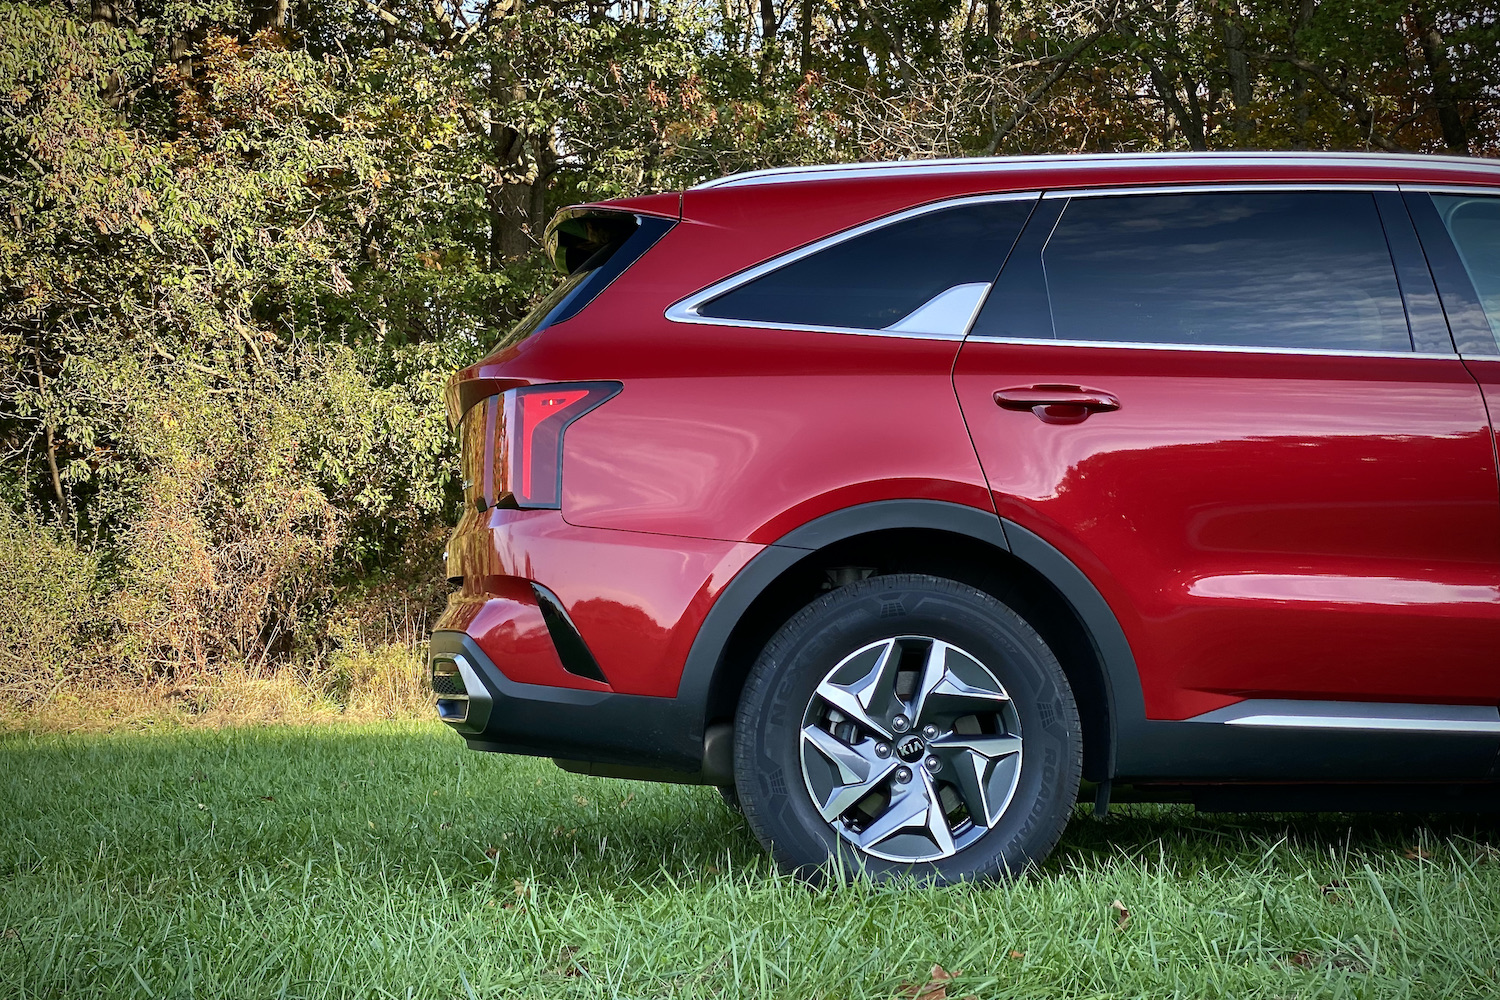 Rear half of the 2021 Kia Sorento Hybrid from the passenger side in a grassy field.